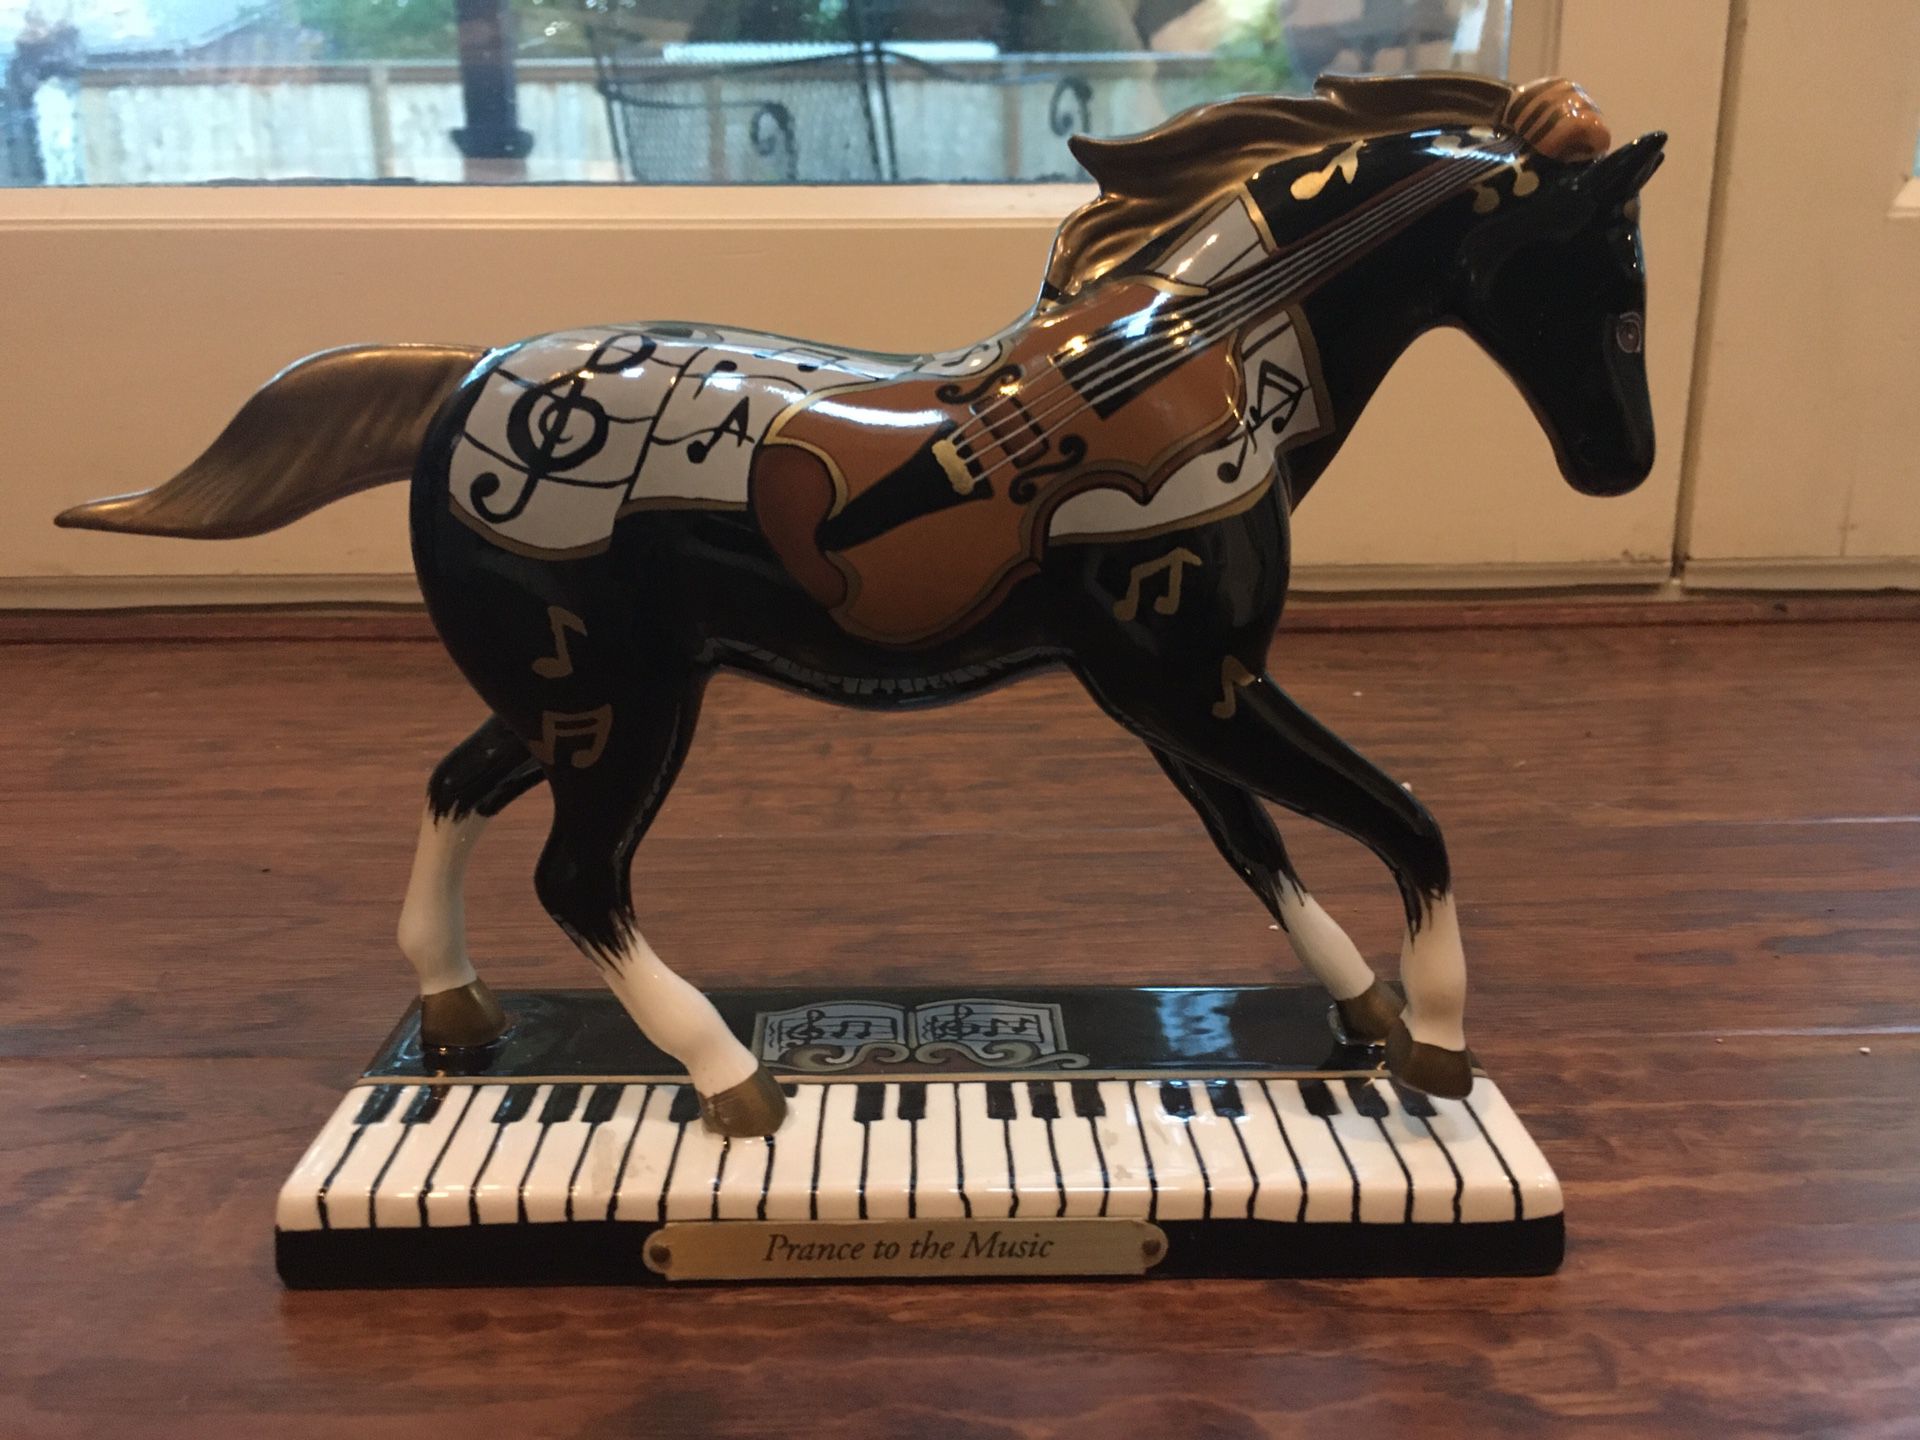 Prance to the music painted pony.